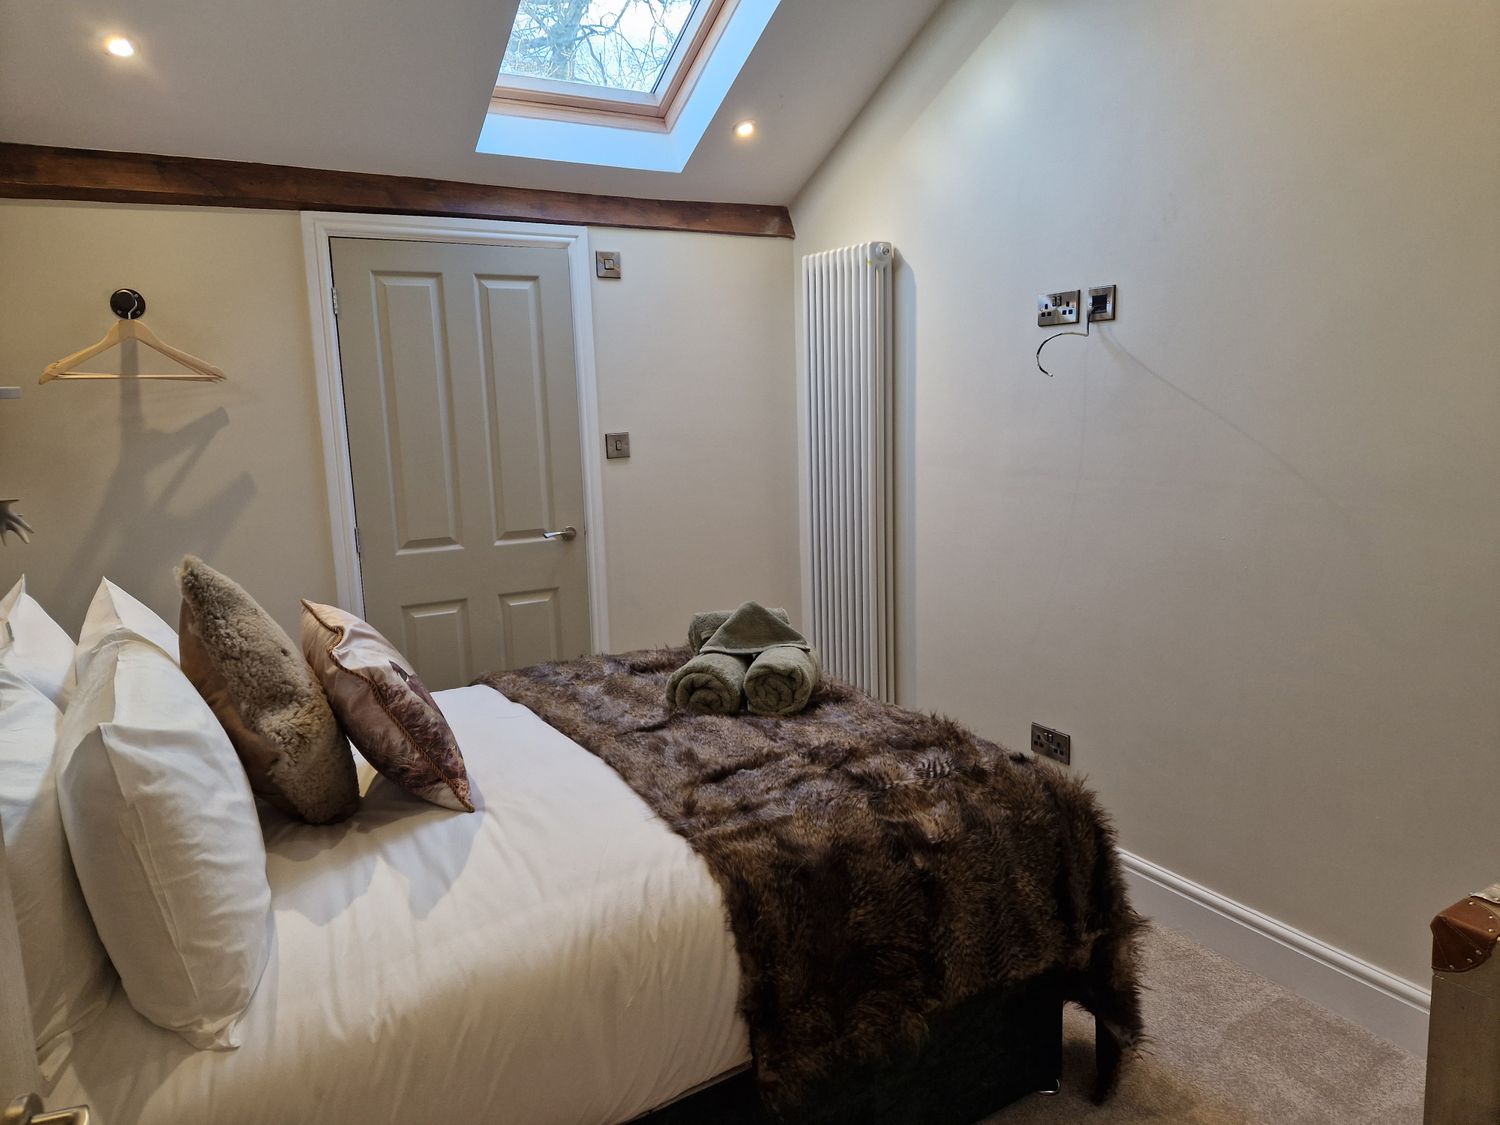 8 Coach House is near Garstang, Lancashire. Three-bedroom barn conversion with hot tub. Contemporary